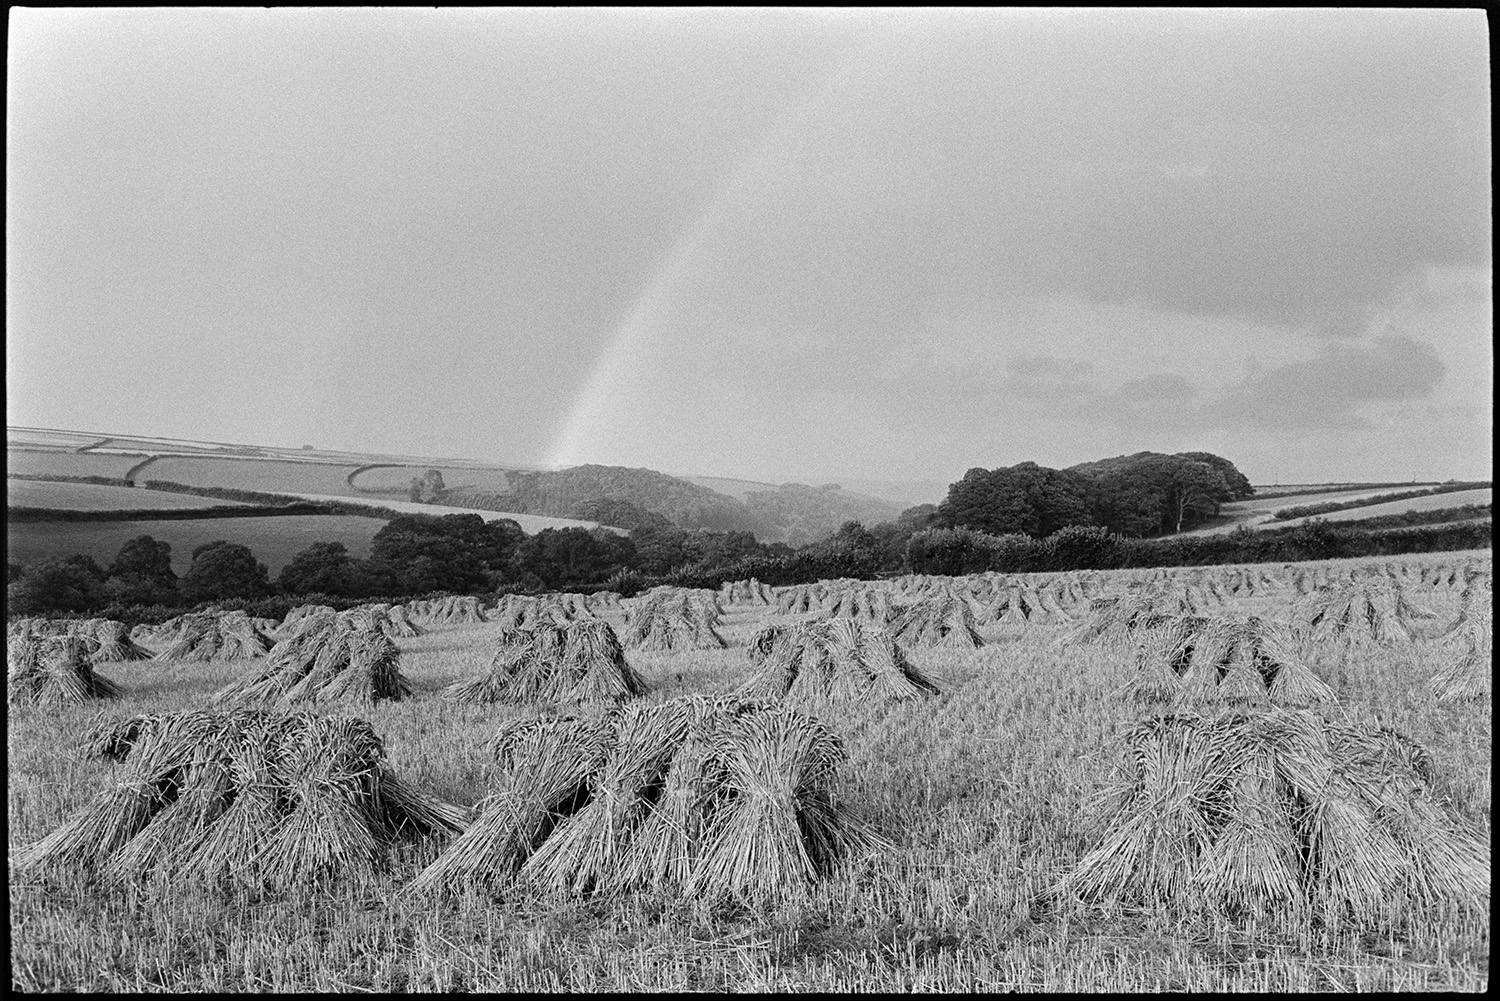 Cloudy landscape, corn stooks with shadows, rainbow. 
[A field with stooks of corn at East Westacott, Riddlecombe. A rainbow can be seen across the landscape of trees and fields in the background.]